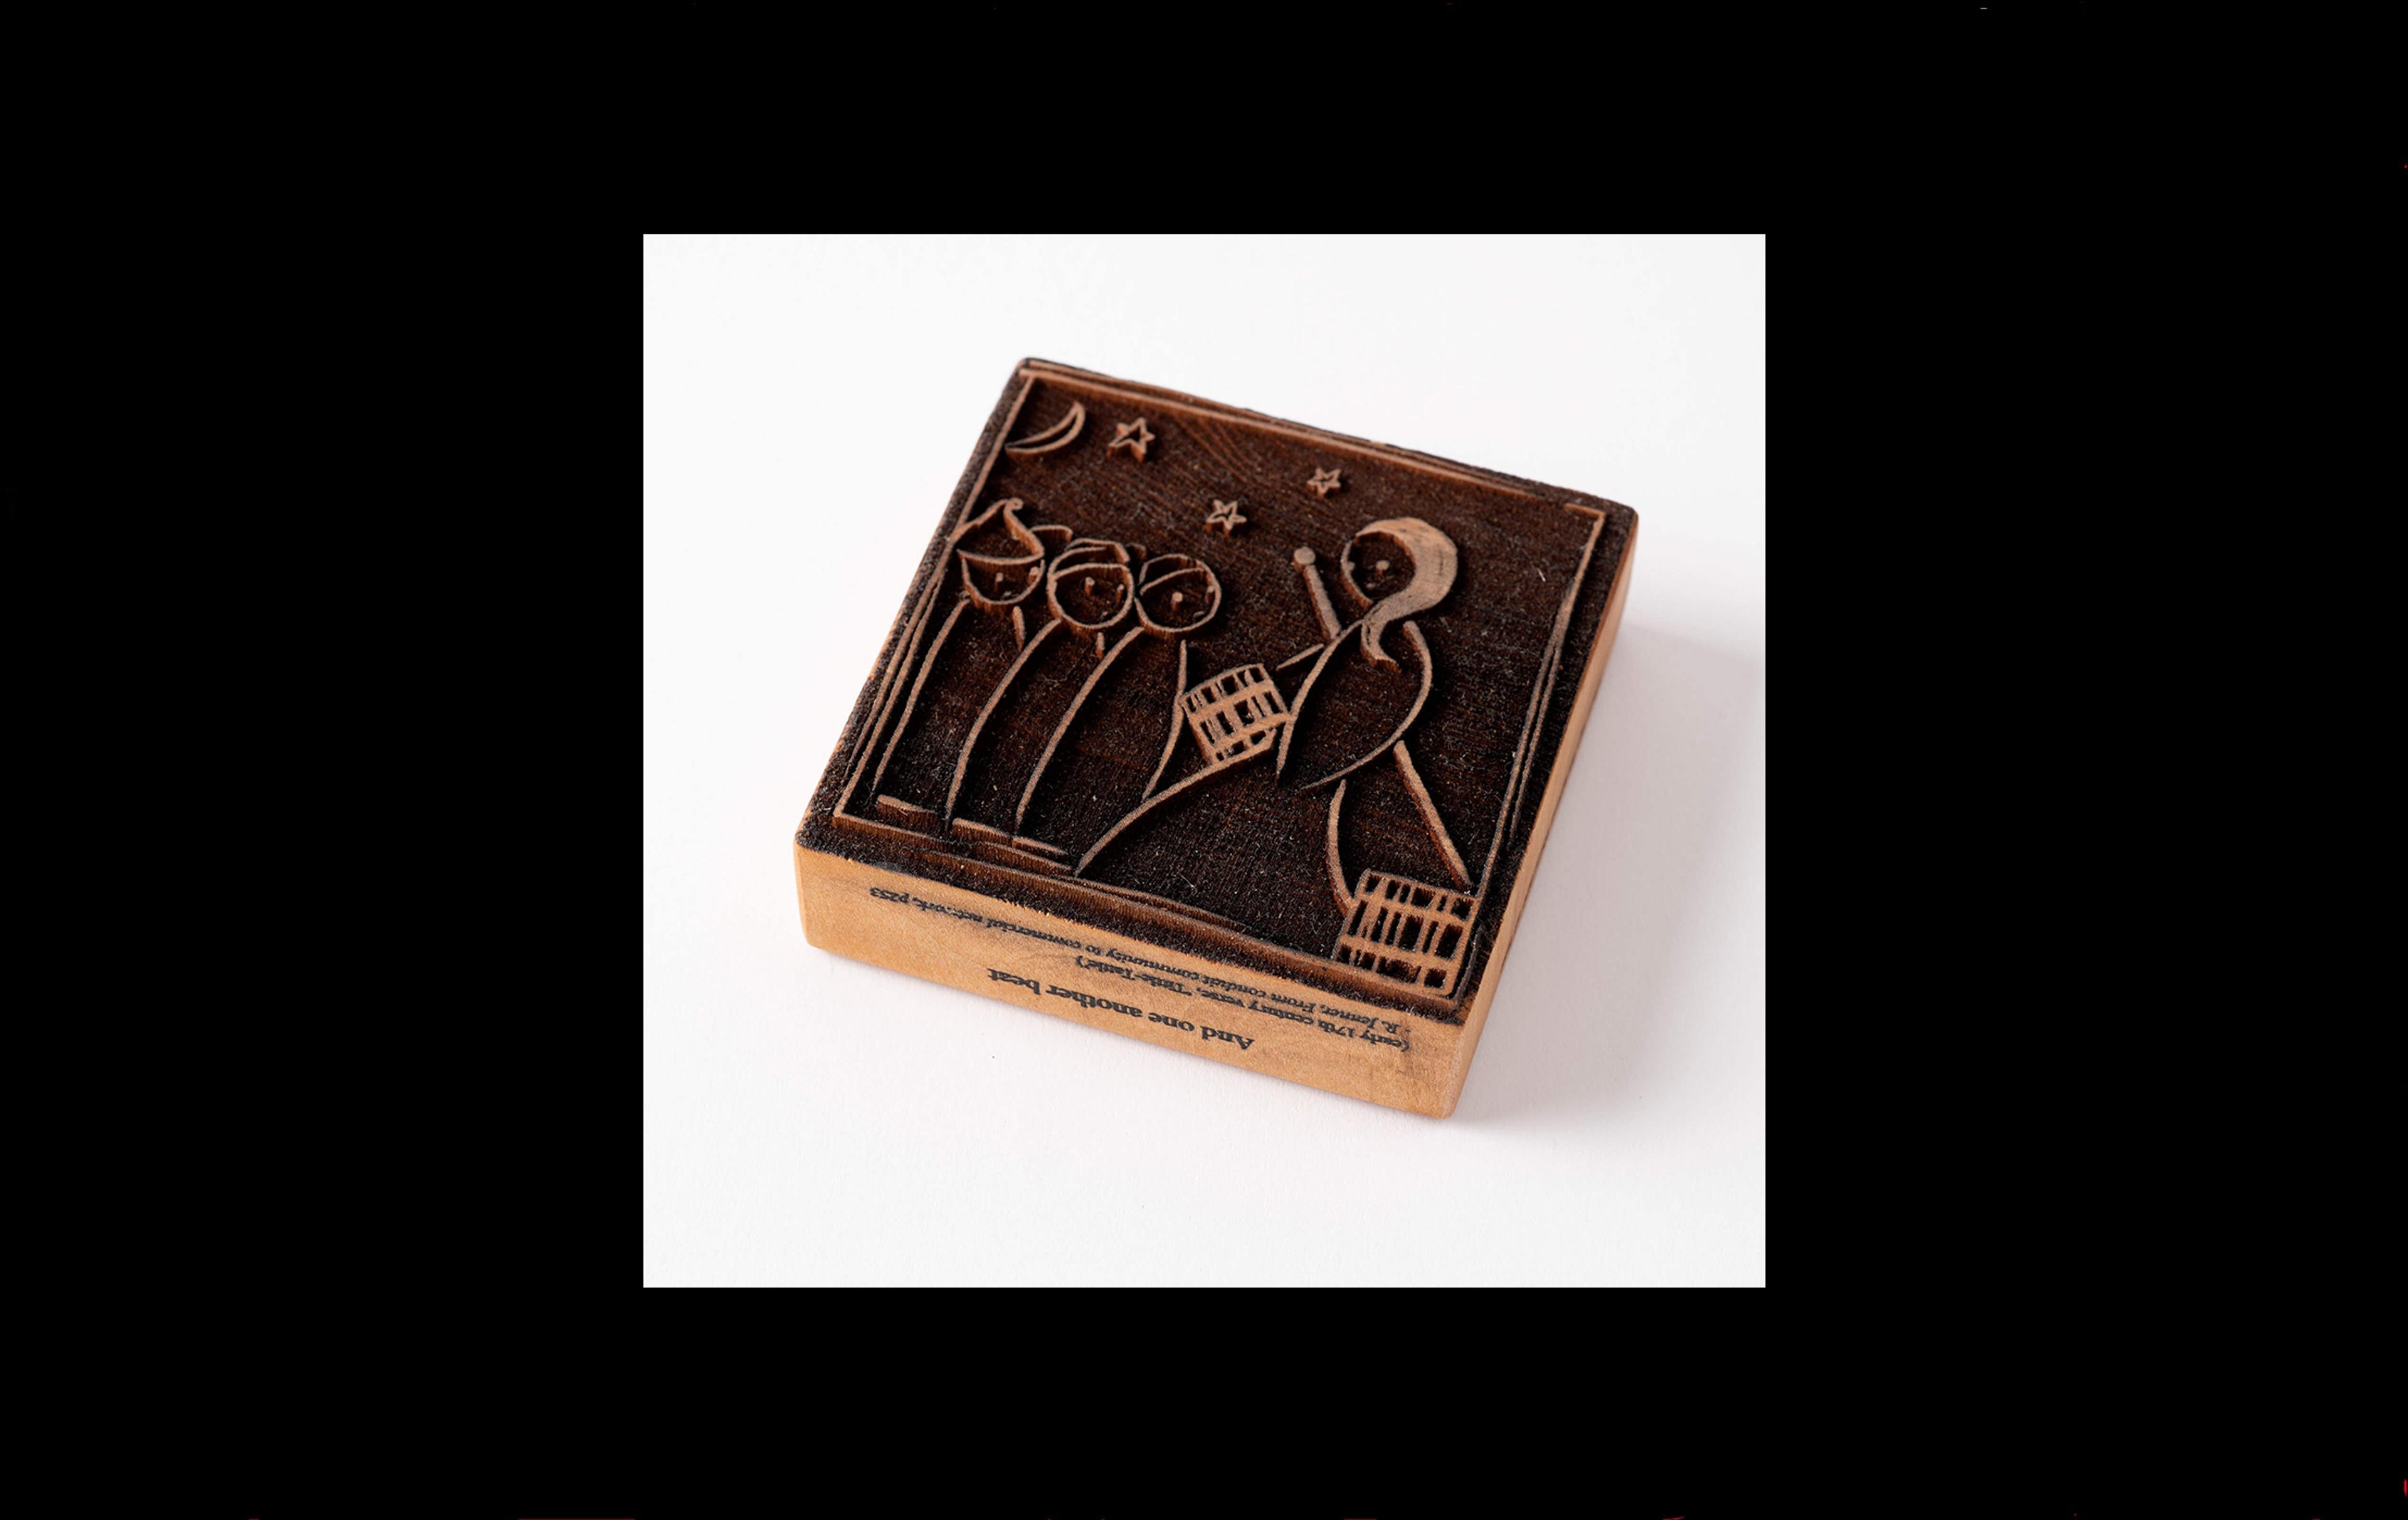 Wooden block with an image of a woman carrying water buckers with three smaller people under the moonlight etched into the surface